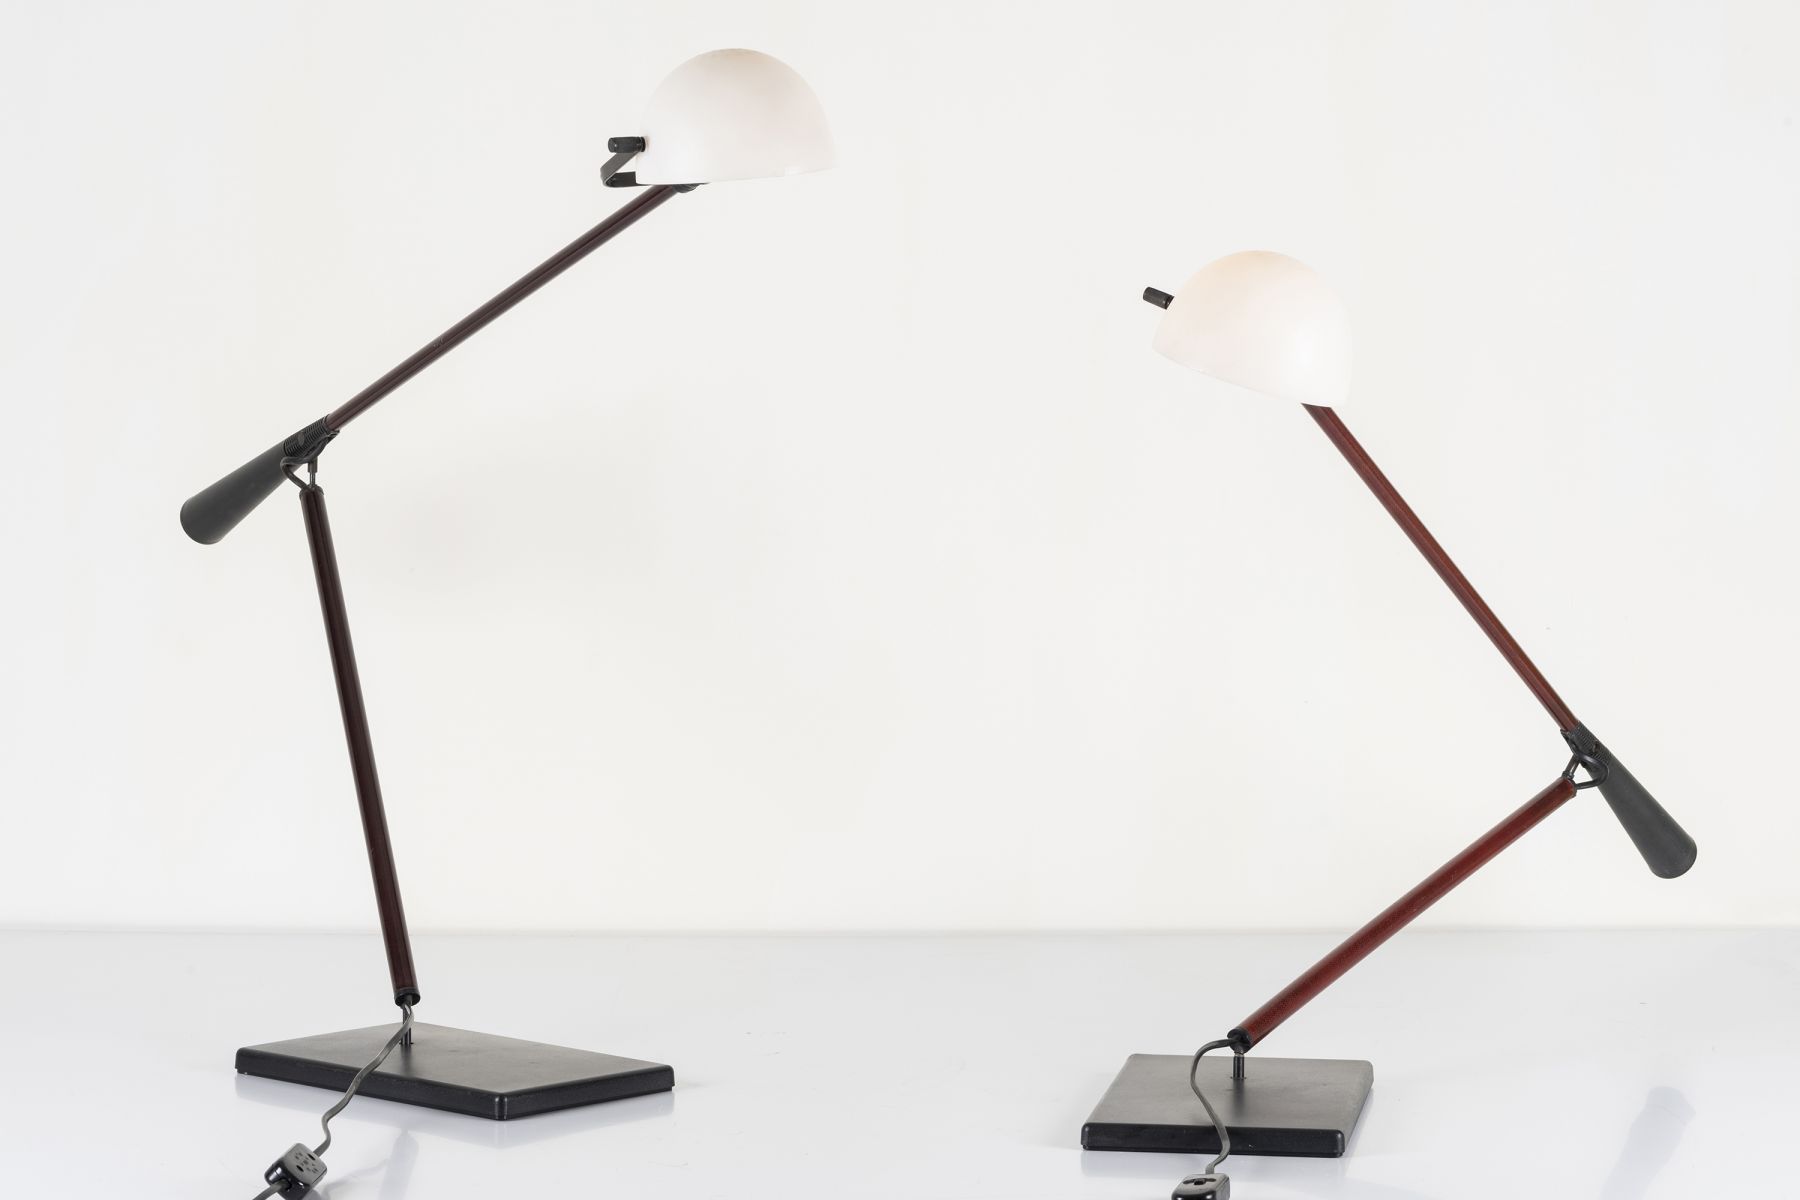 Two table lamps Paolo Rizzato pic-1